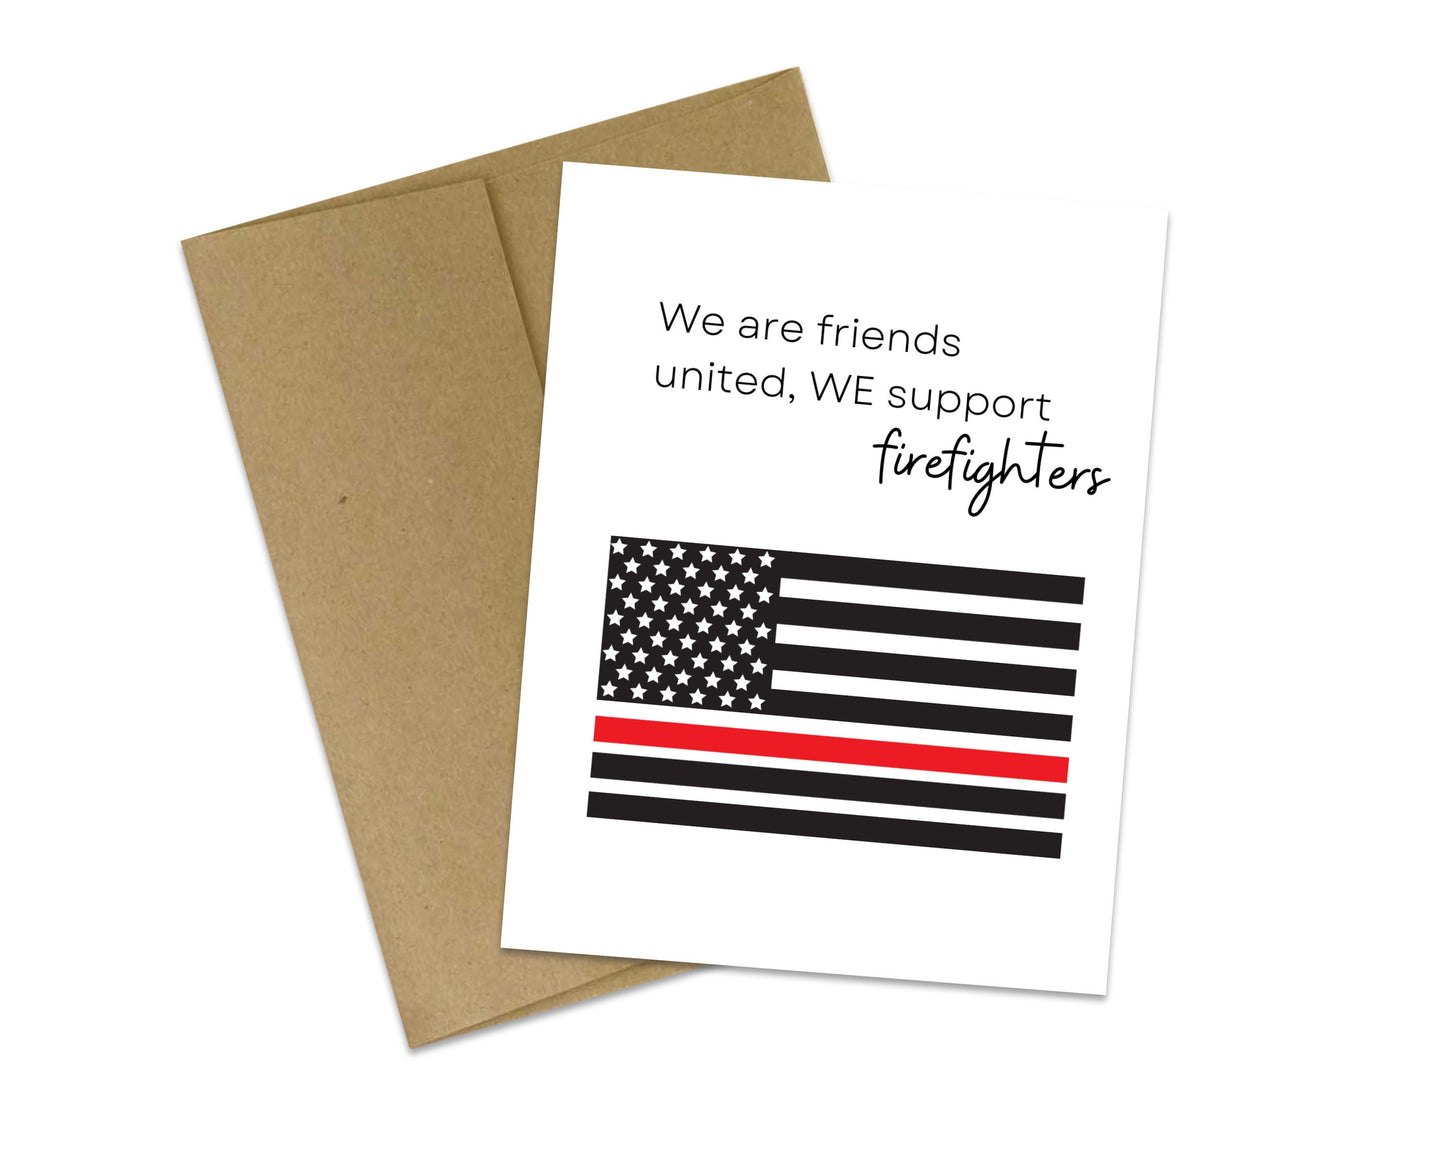 We are friends united, WE support firefighters - Firefighter Support Card